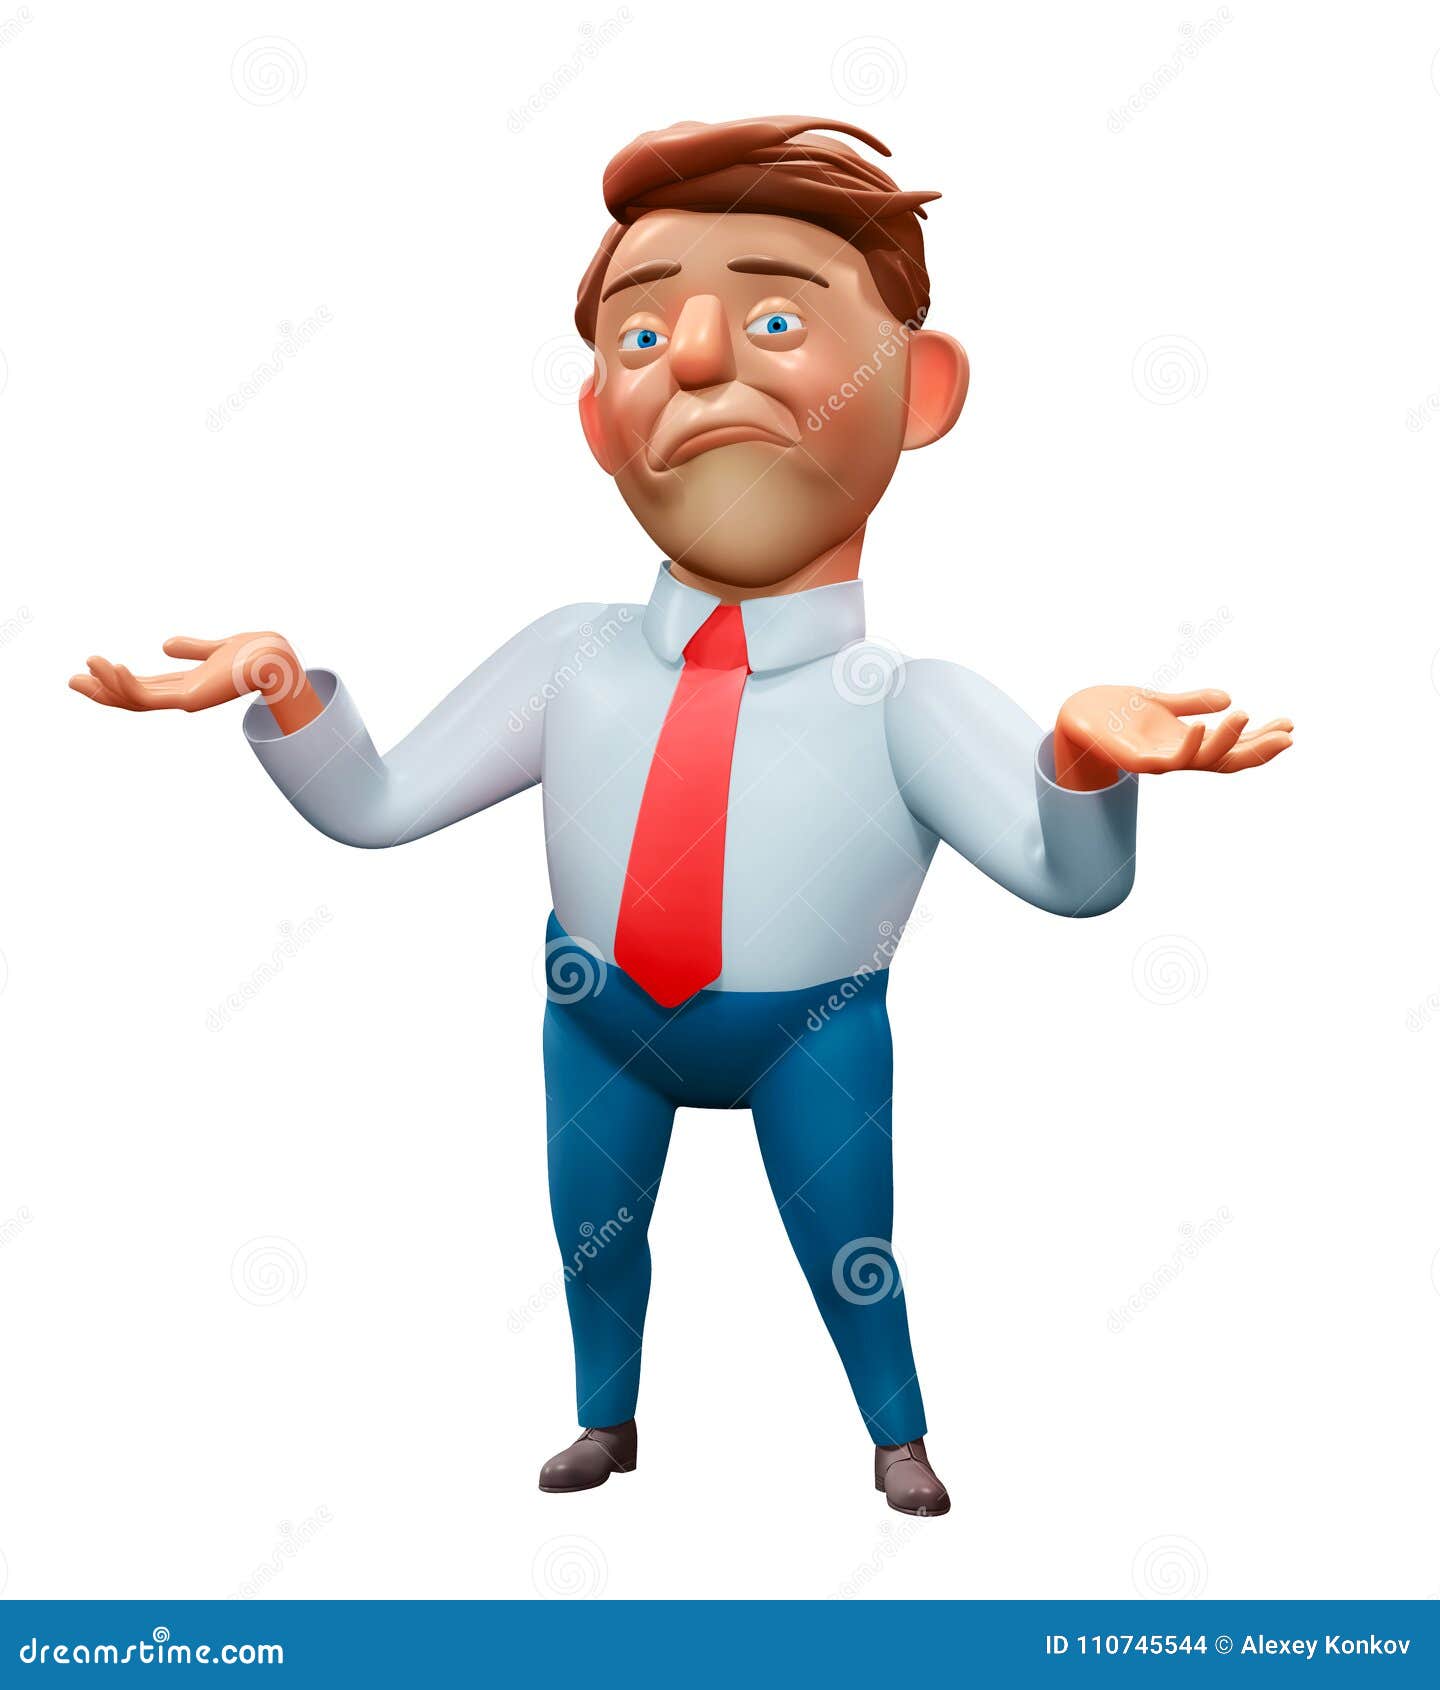 office manager cartoon discouraged character 3d 